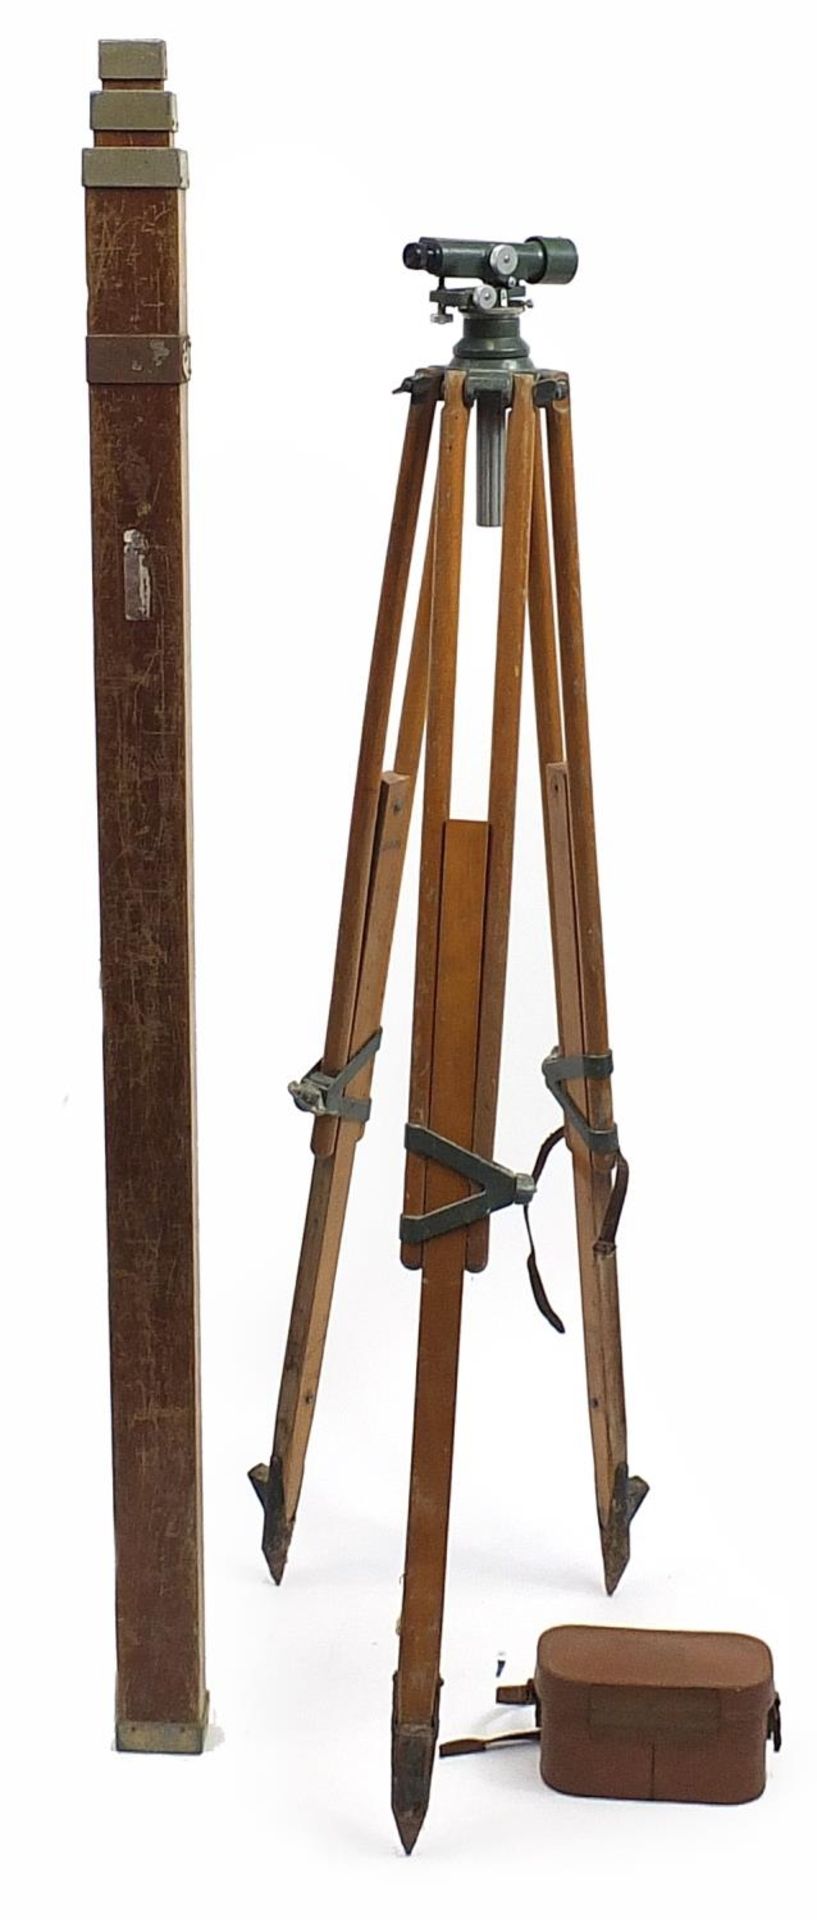 Hilger & Watts SL10-1 surveyor's level in leather case with tripod stand and measuring staff - Image 3 of 6